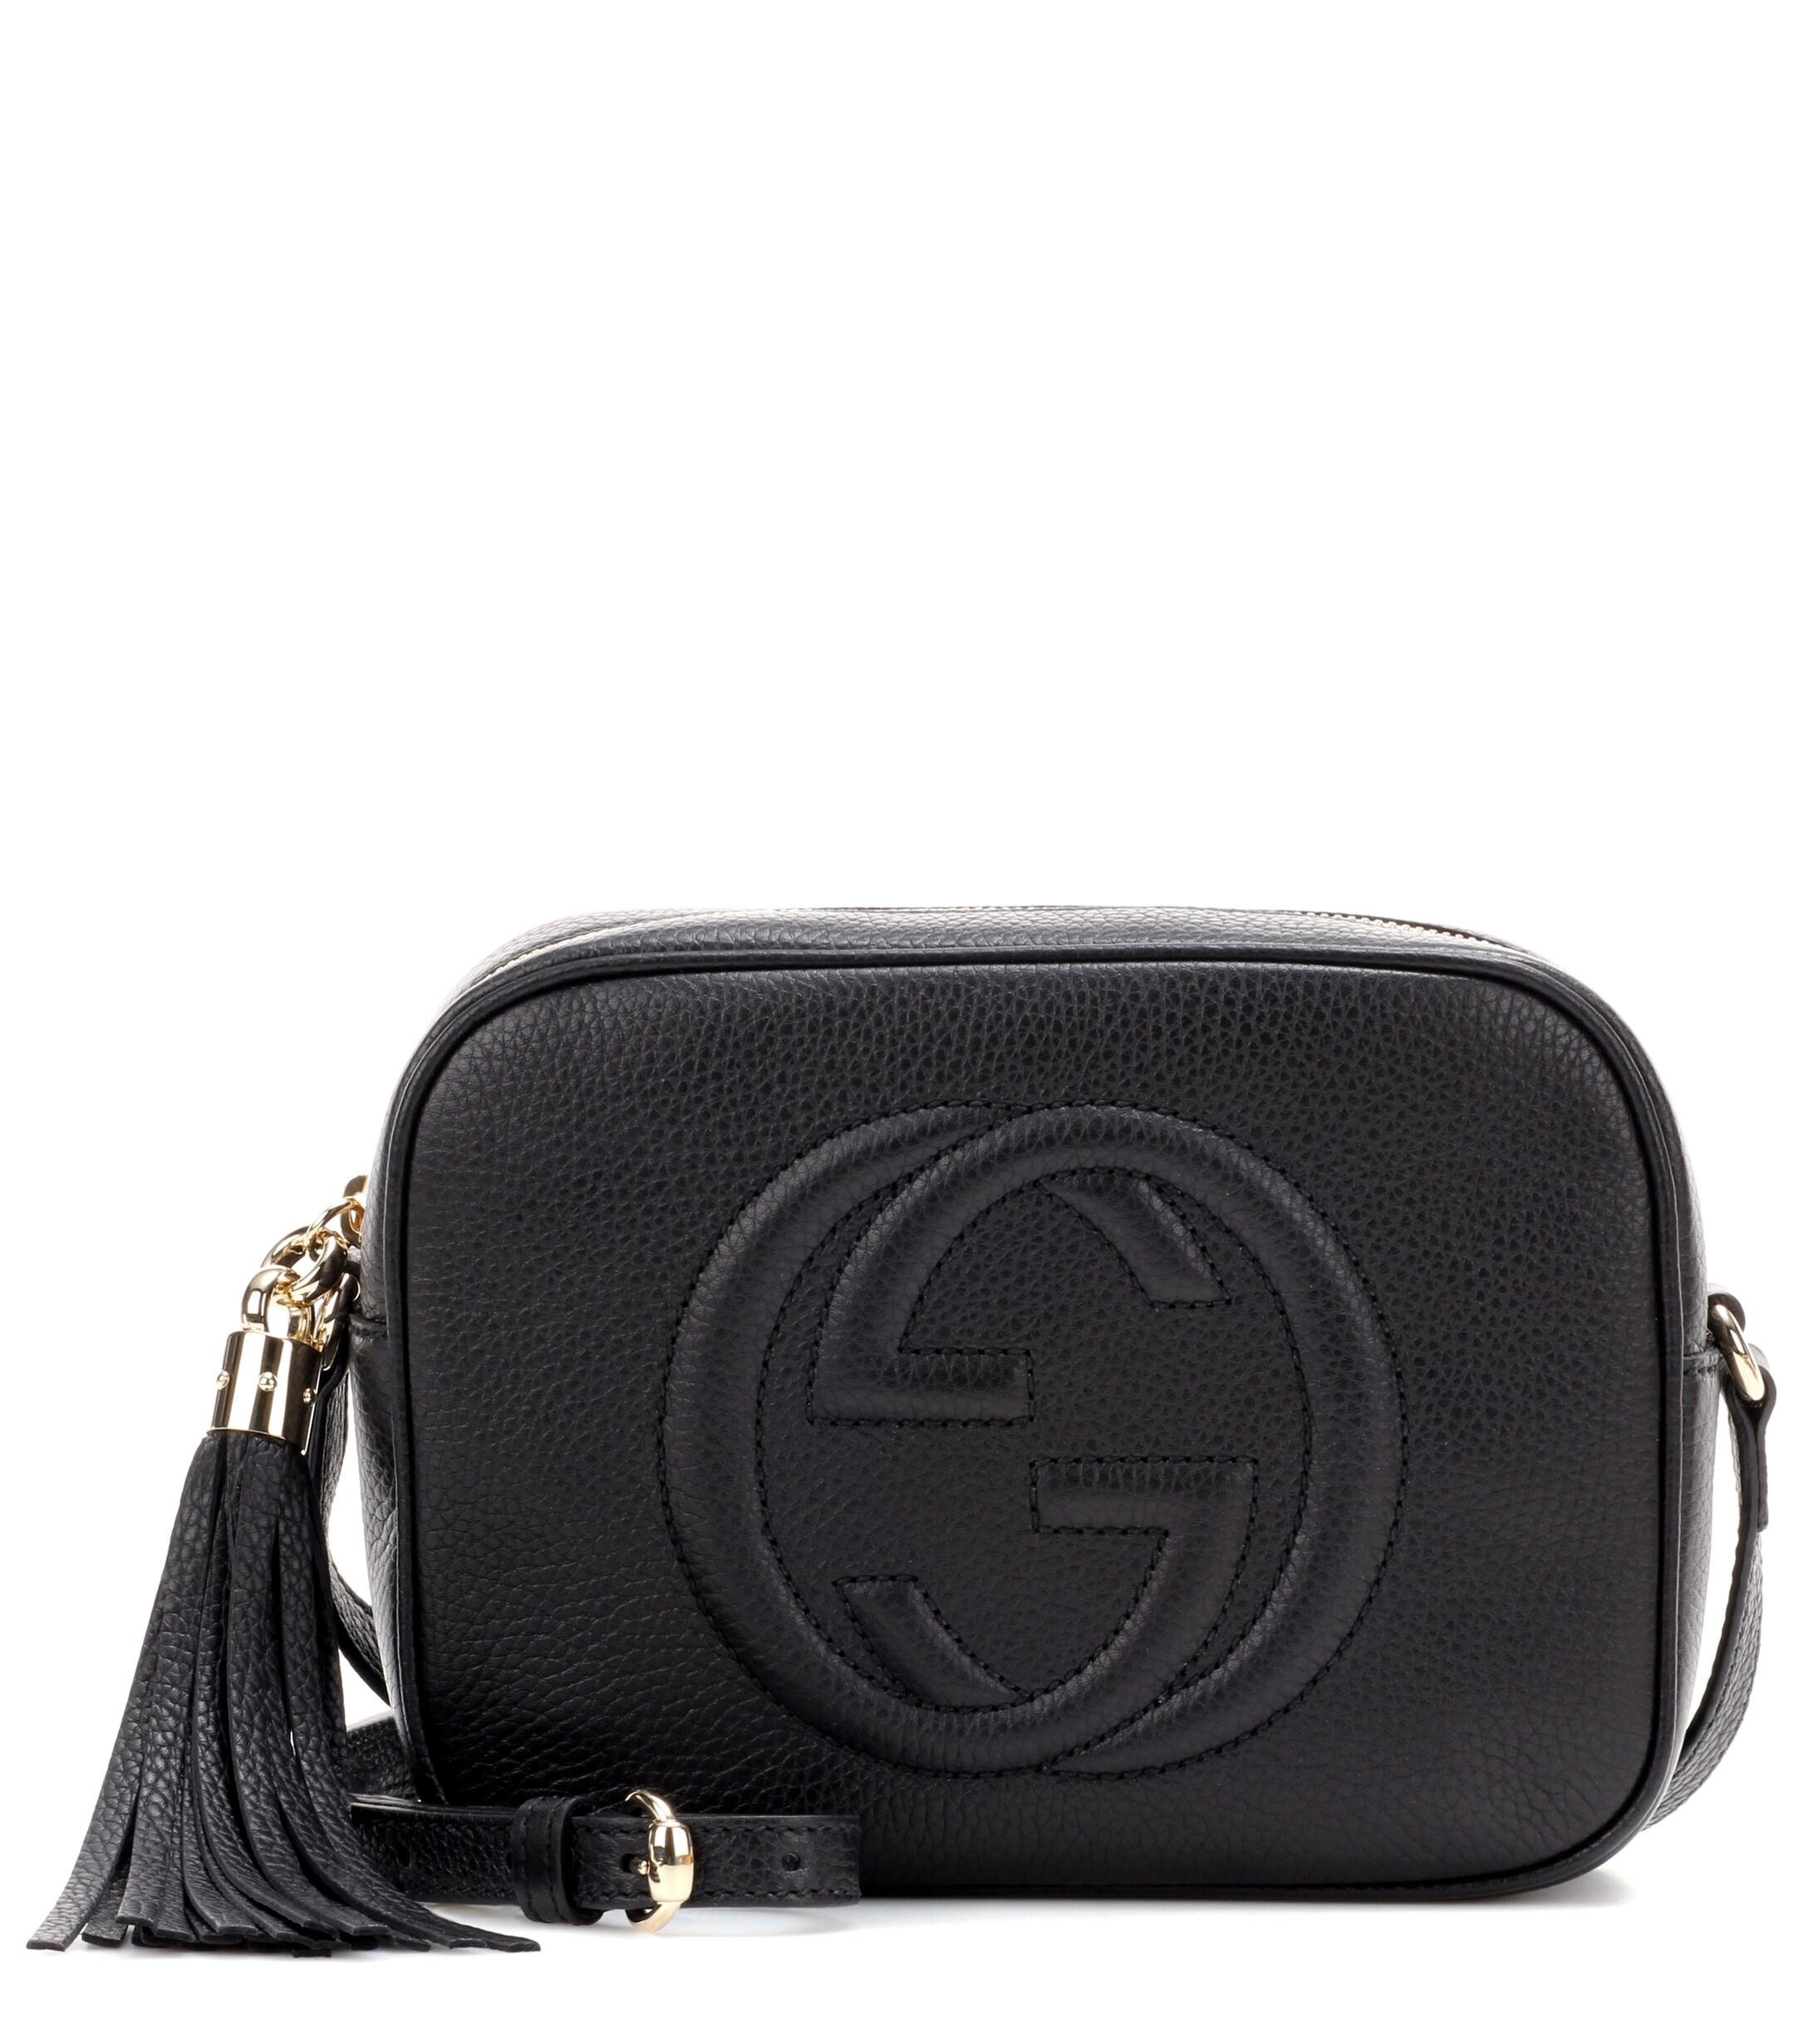 Gucci Small Soho Leather Crossbody Bag in Black - Save 32% - Lyst